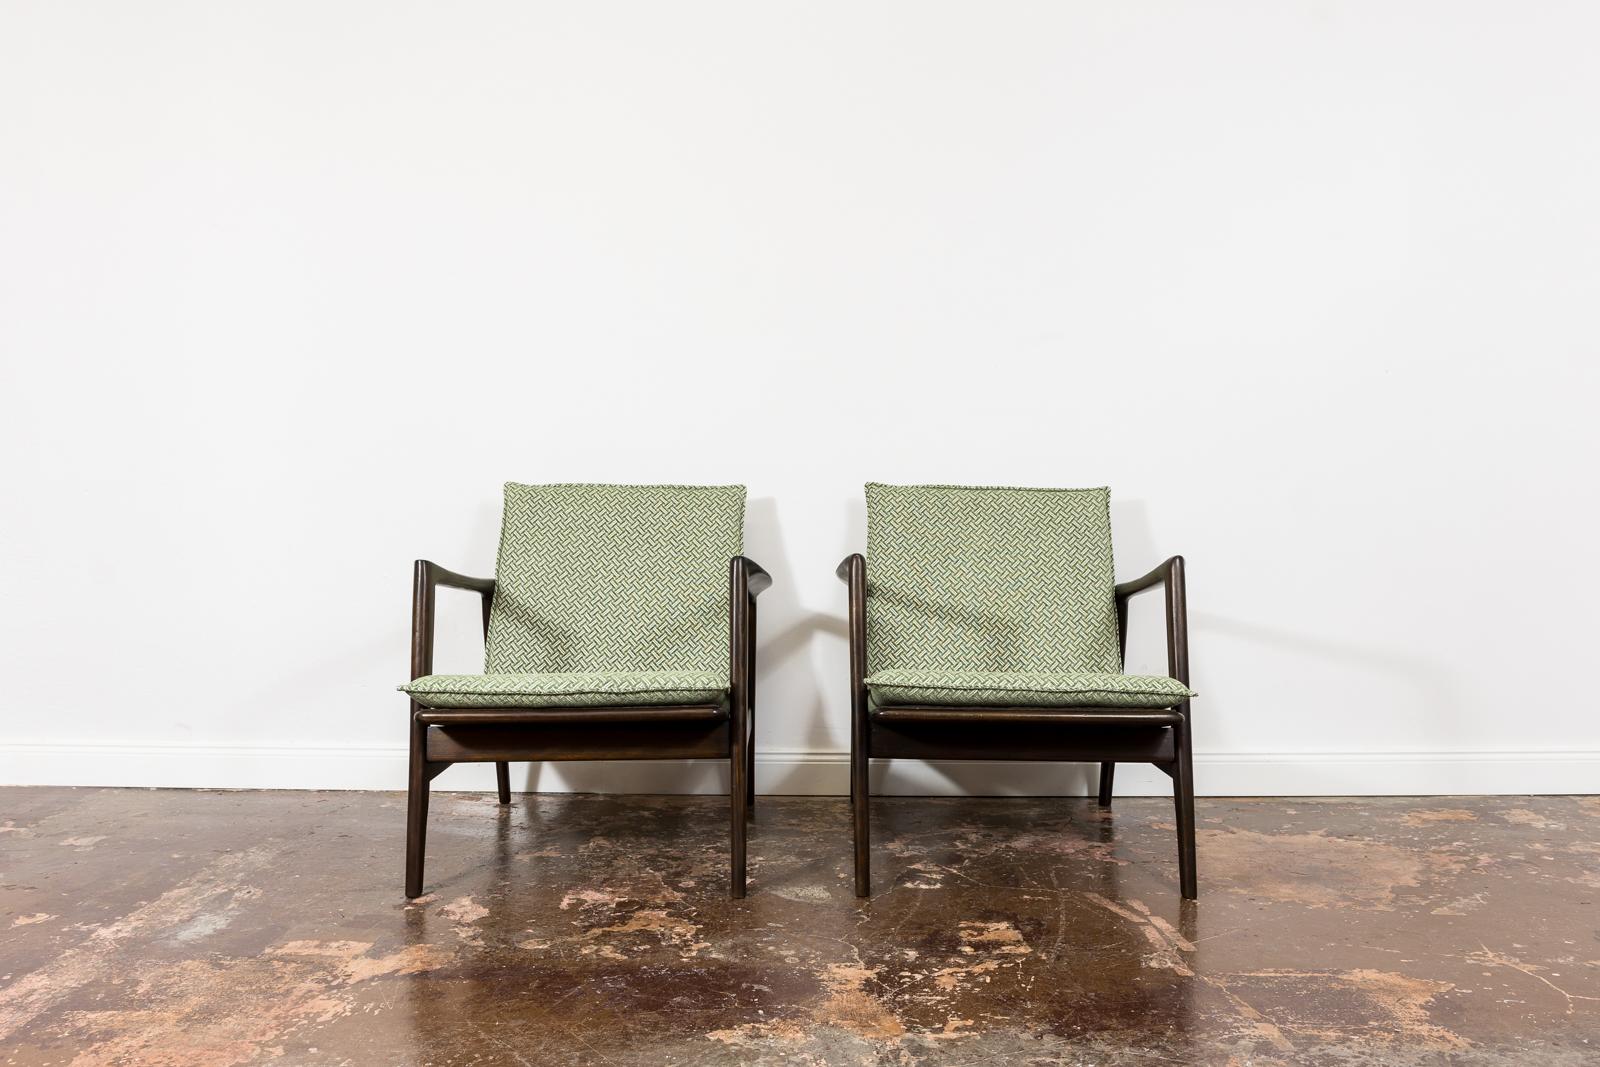 Pair of Mid Century Modern Armchairs Type 300-130, 1960s, Poland
Reupholstered in green and white geometric pattern fabric.
Solid beech frames have been completely restored and refinished.